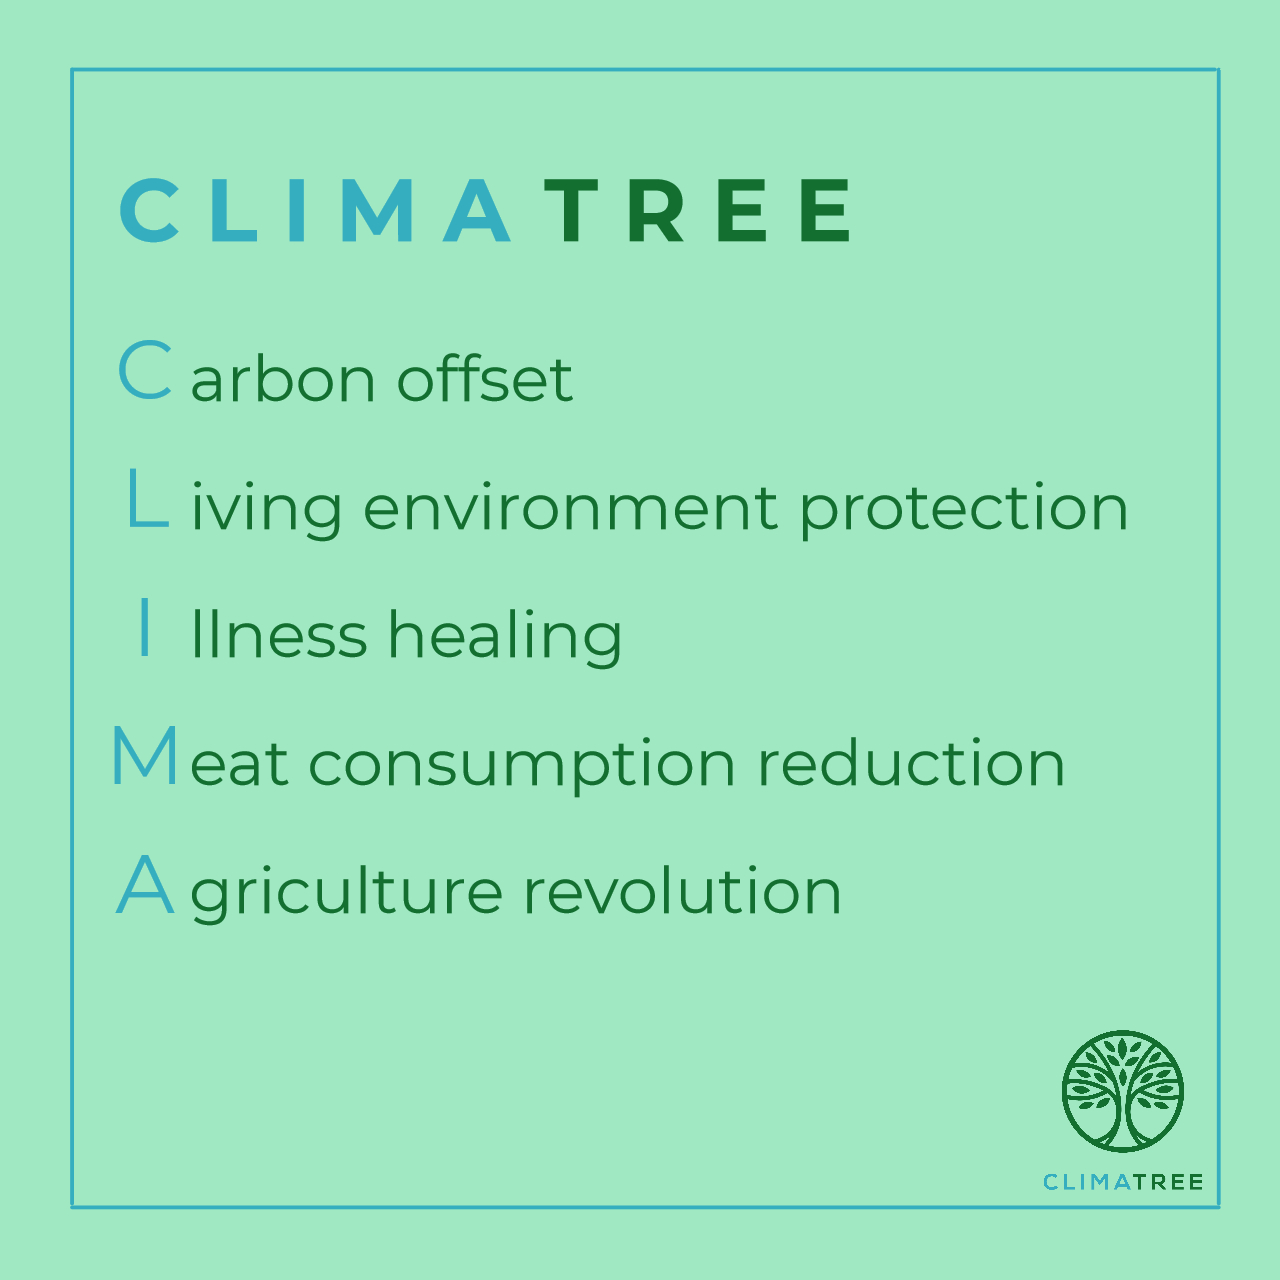 CLIMATREE Main Missions